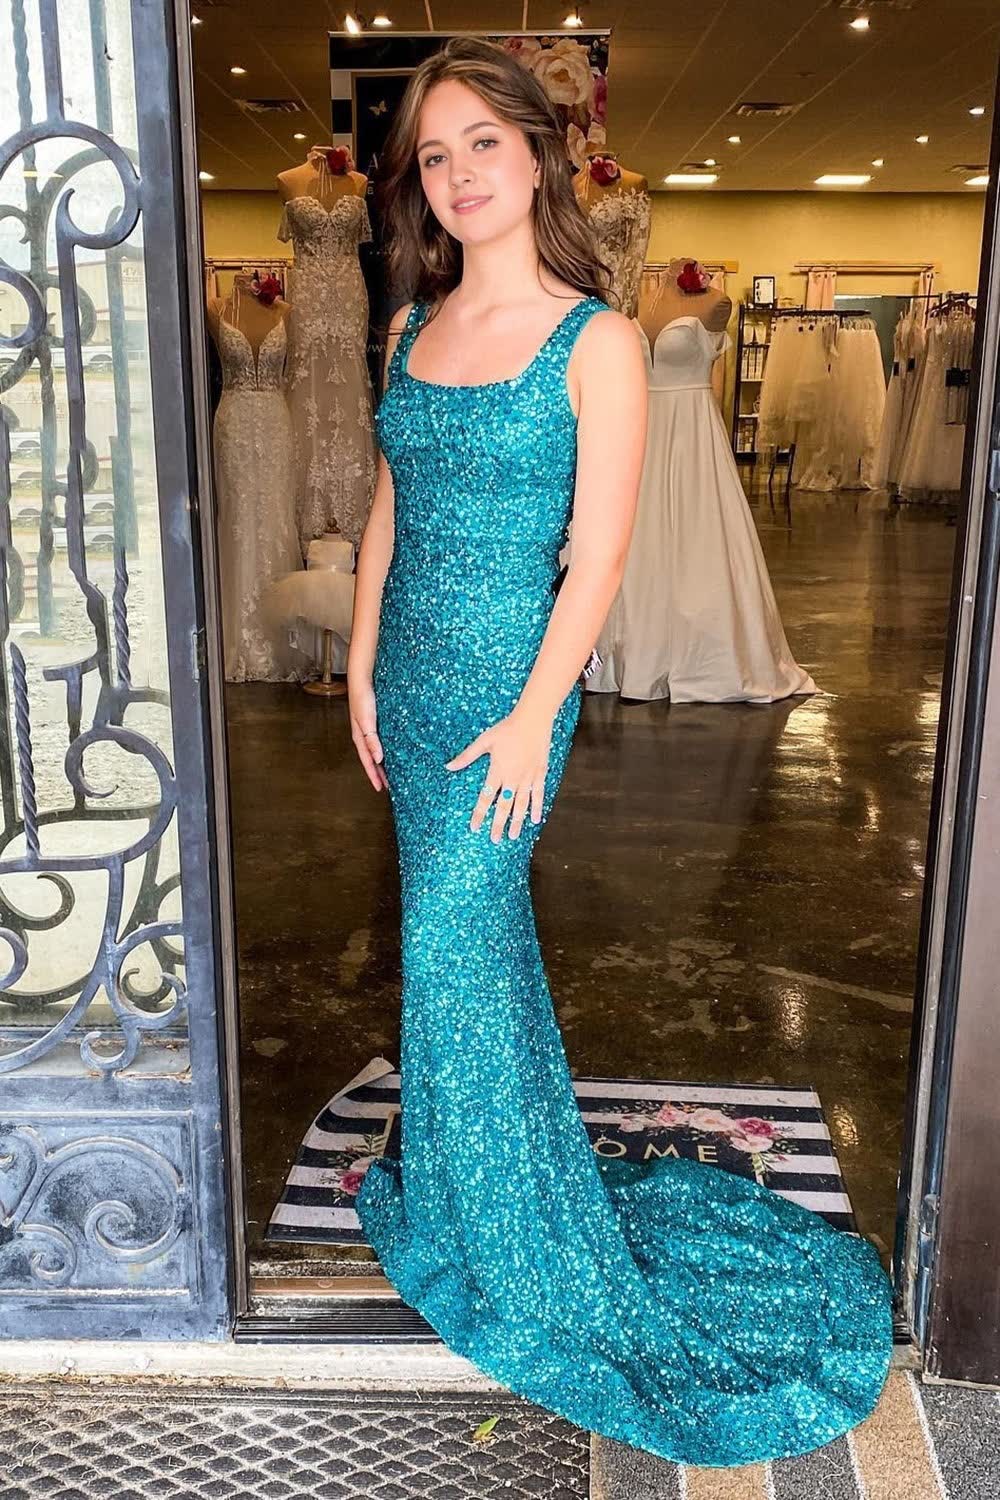 Mermaid Square Neck Sparkly Turquoise Sequins Long Corset Prom Dress outfits, Mermaid Square Neck Sparkly Turquoise Sequins Long Prom Dress